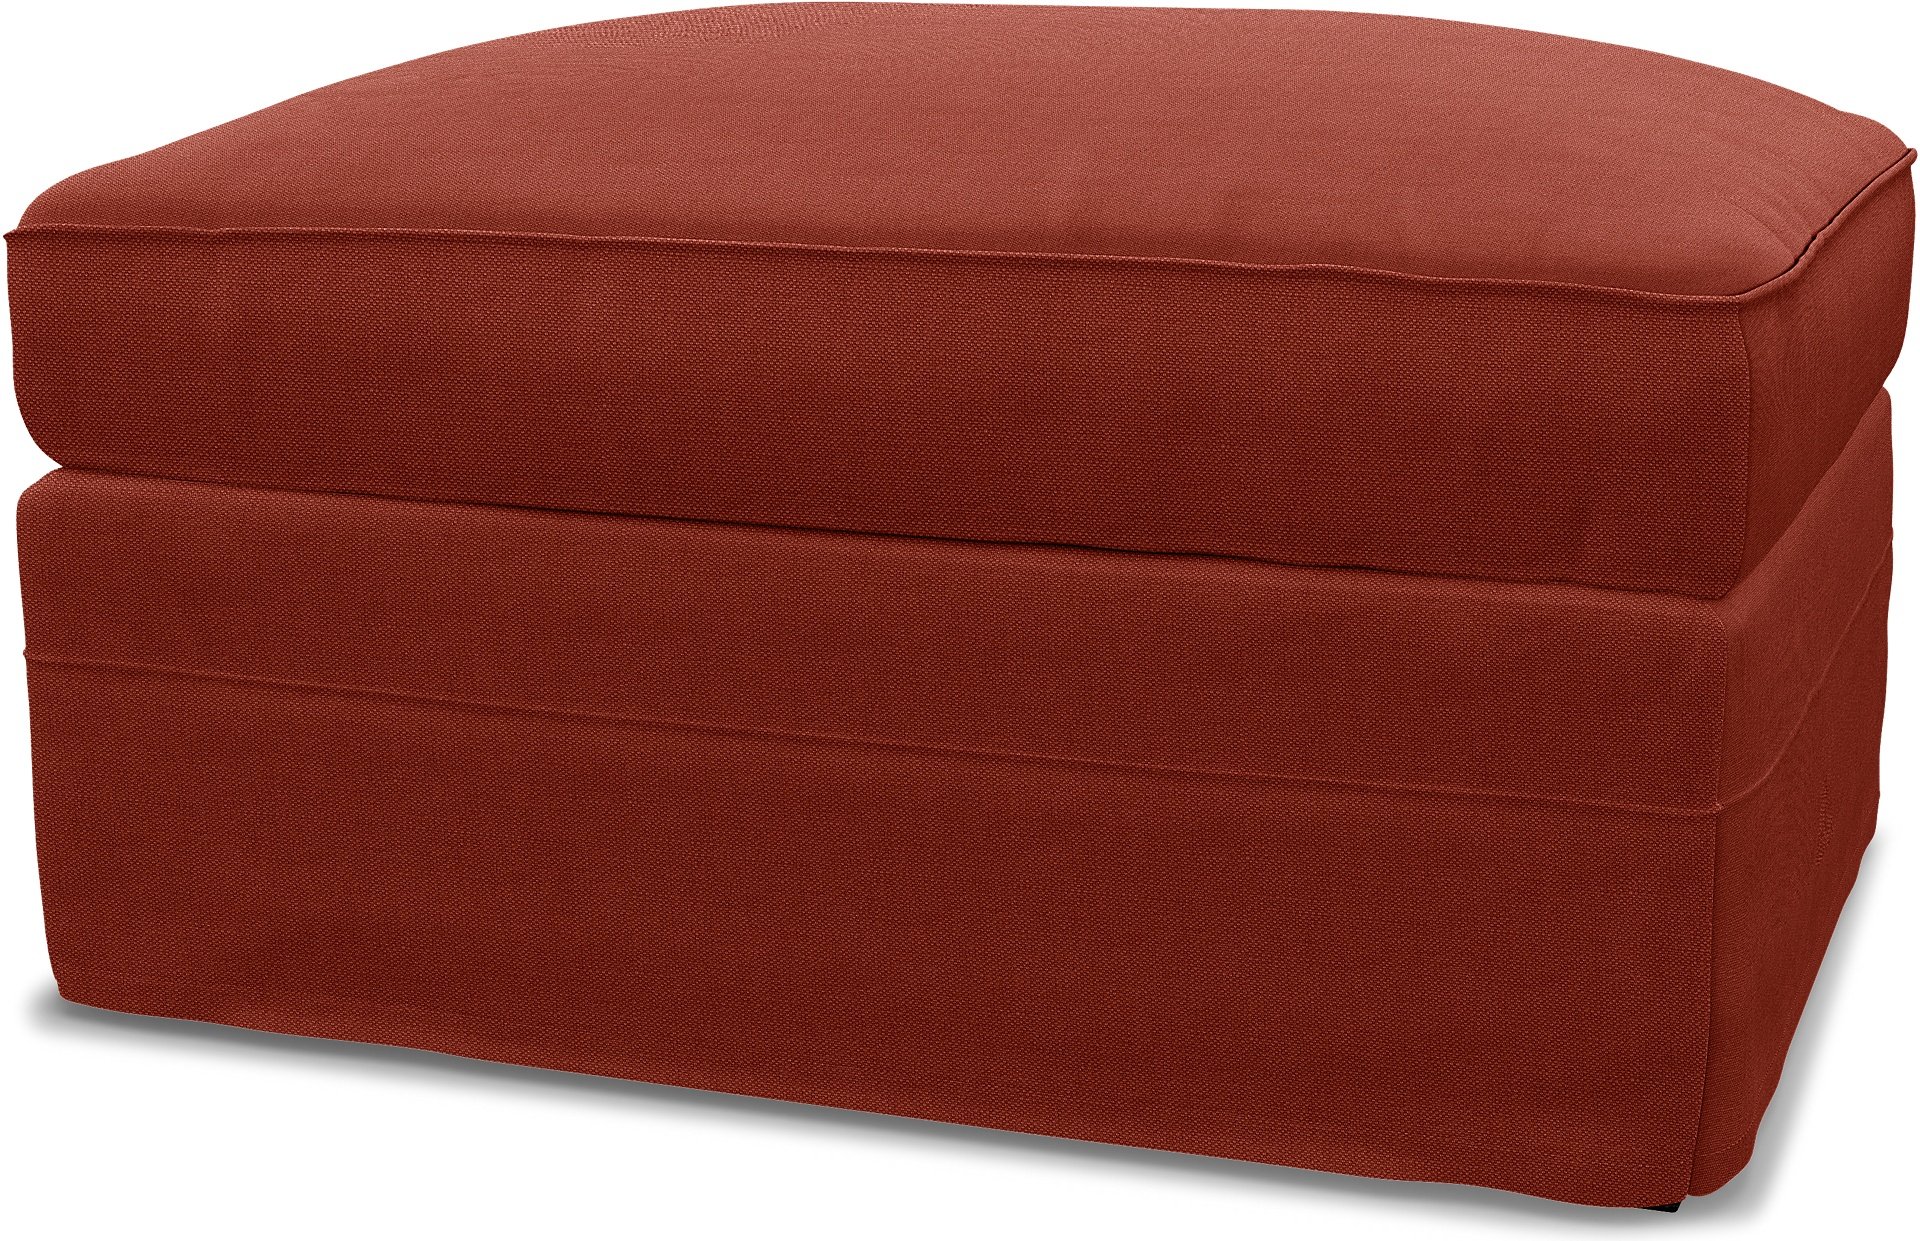 IKEA - Gronlid Footstool with Storage Cover, Cayenne, Linen - Bemz